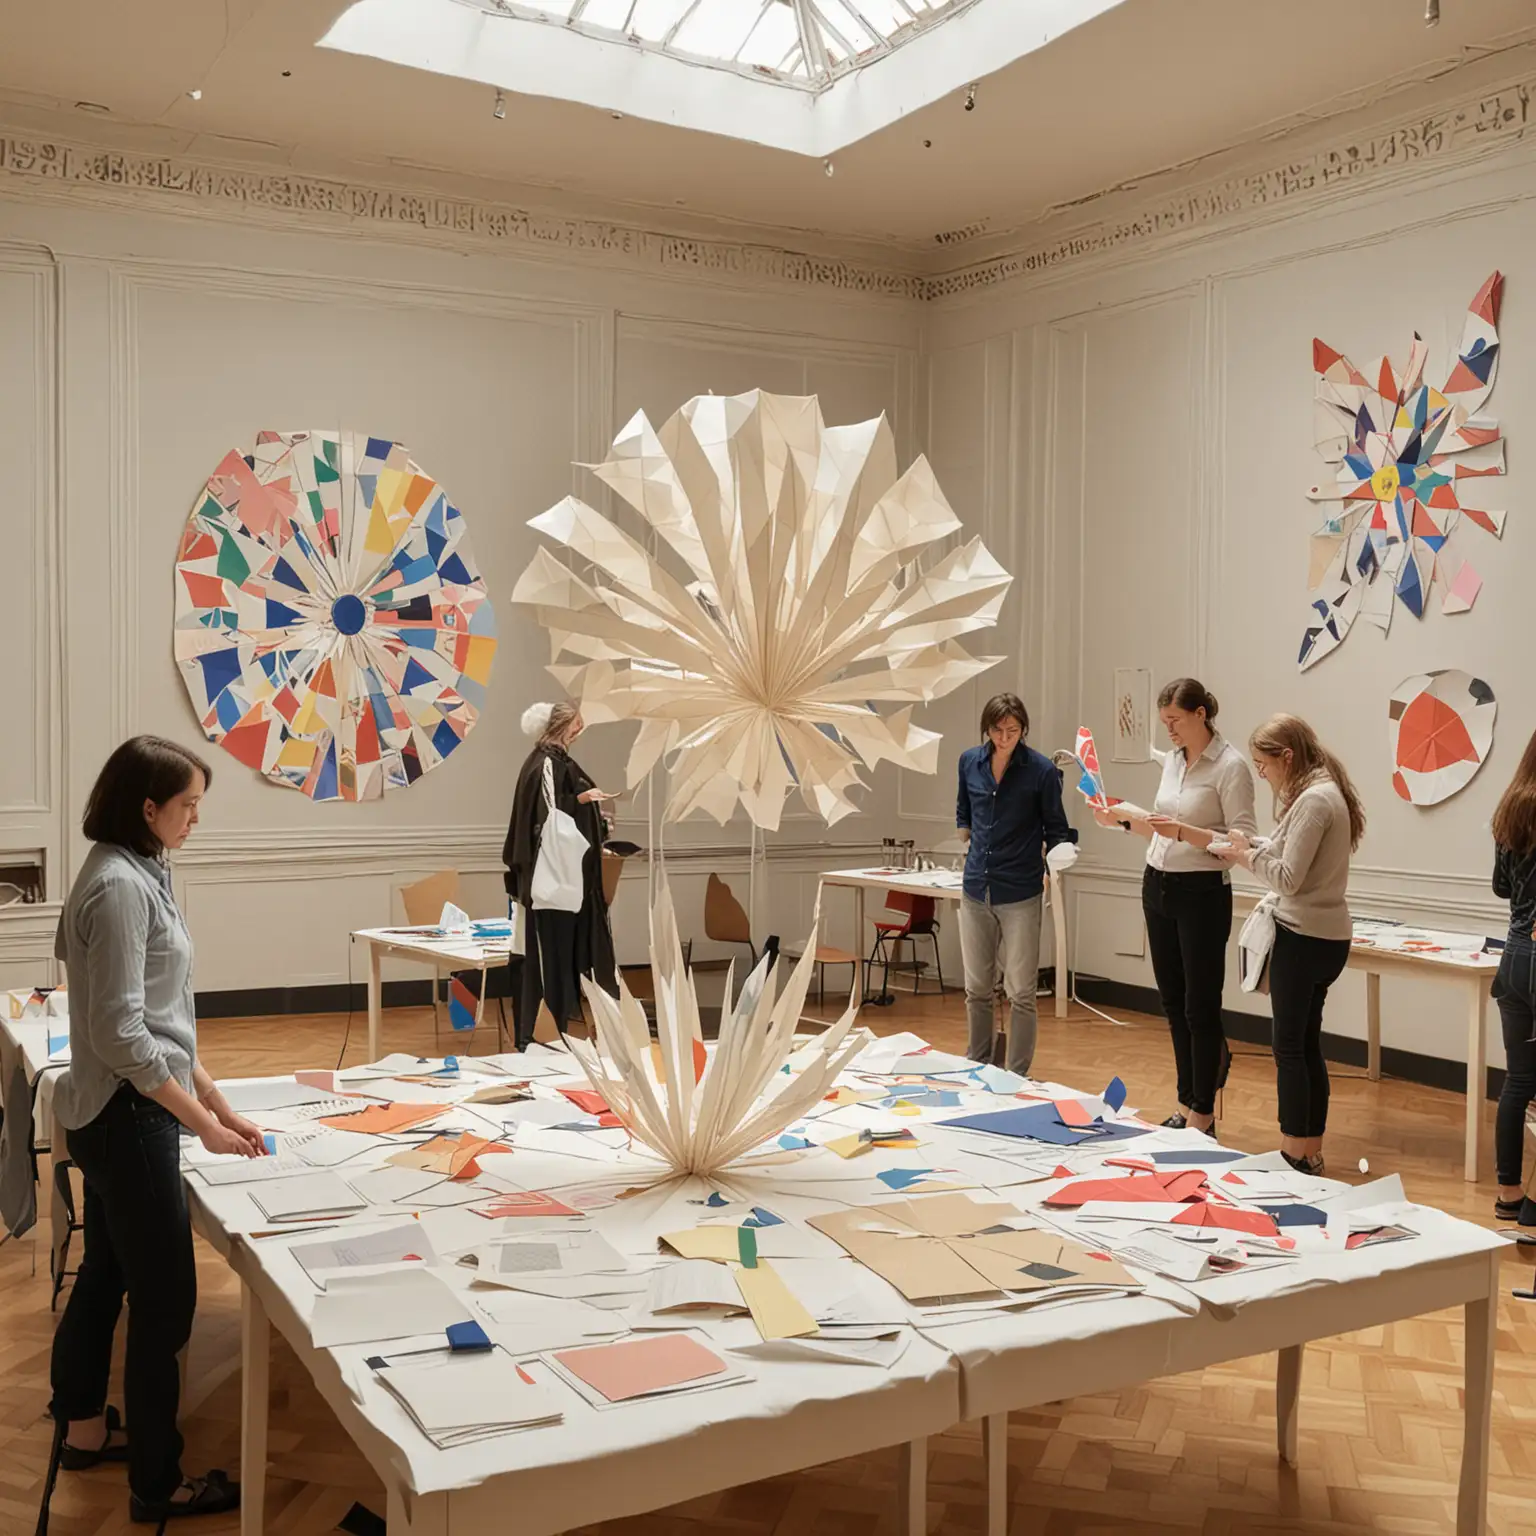 AI creating art for exhibition inspired by himla af klint and kandinsky, with big paper origami sculpture in middle of room. People working with the paper origami sculpture exhibition, curator and designer, in middle of room.